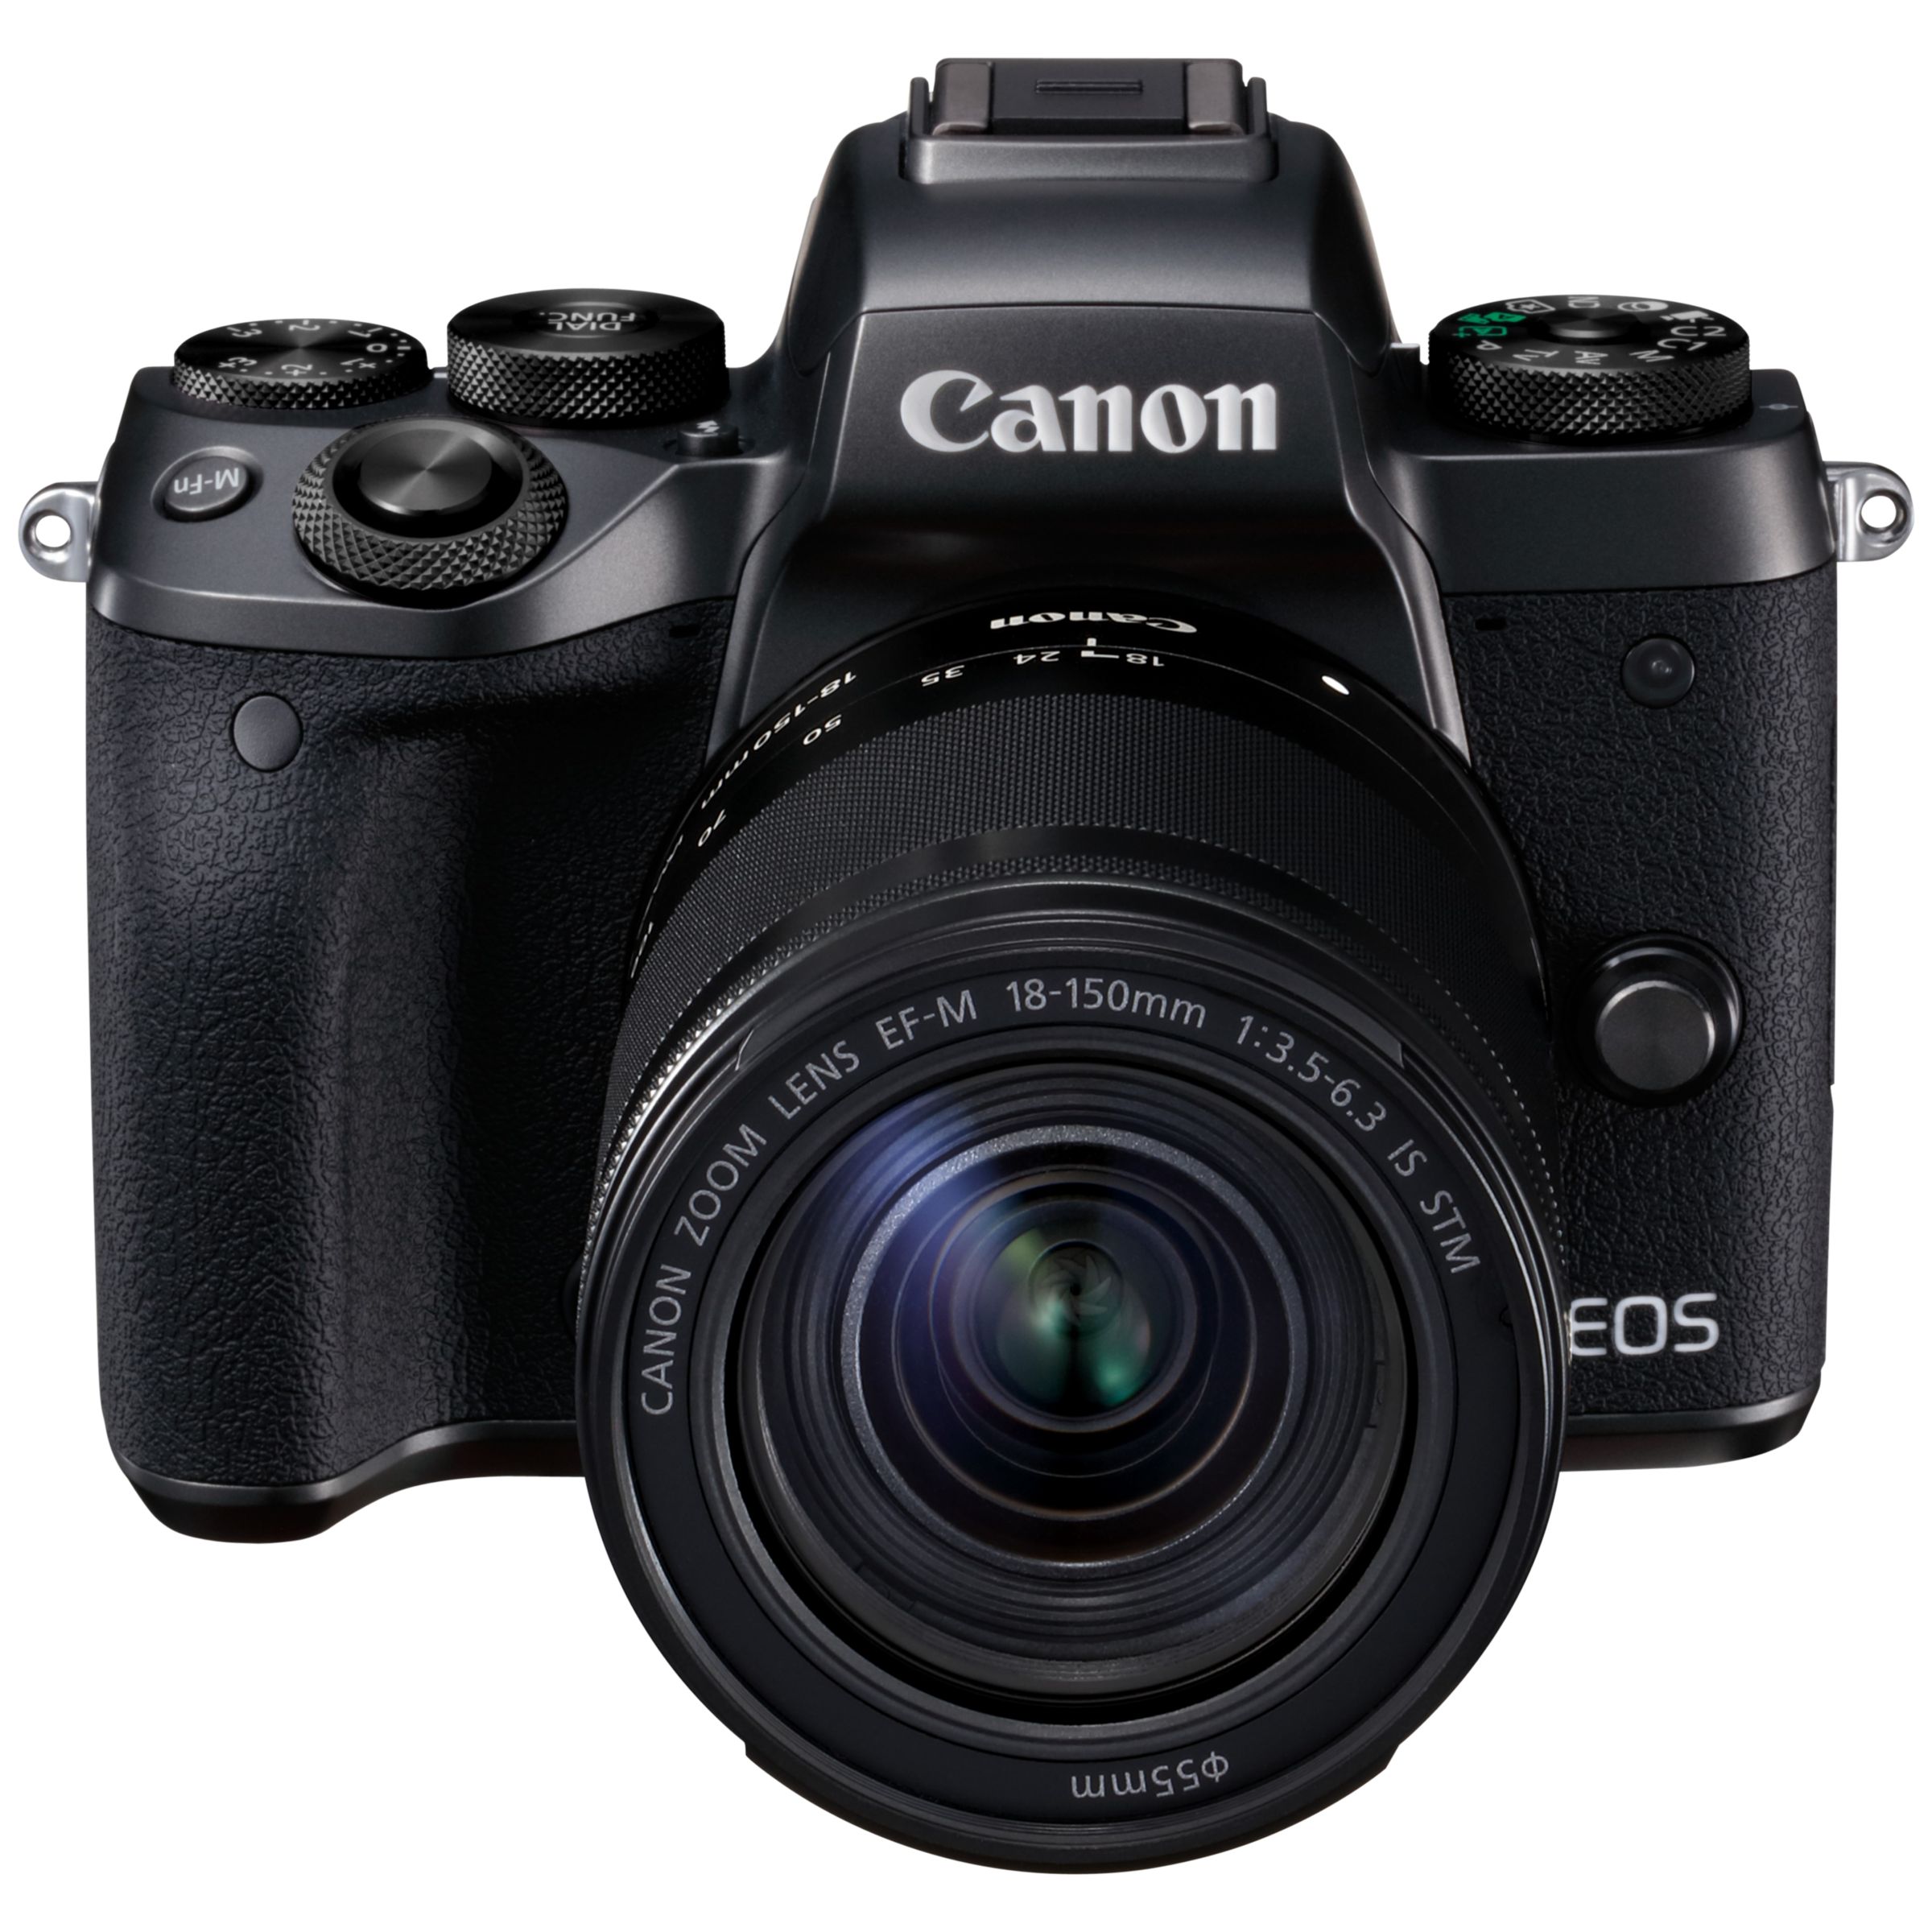 Canon EOS M5 Compact System Camera with EF-M 18-150mm IS STM lens, HD 1080p, 24.2MP, Wi-Fi, Bluetooth, NFC, 3.2 LCD Tiltable Touch Screen